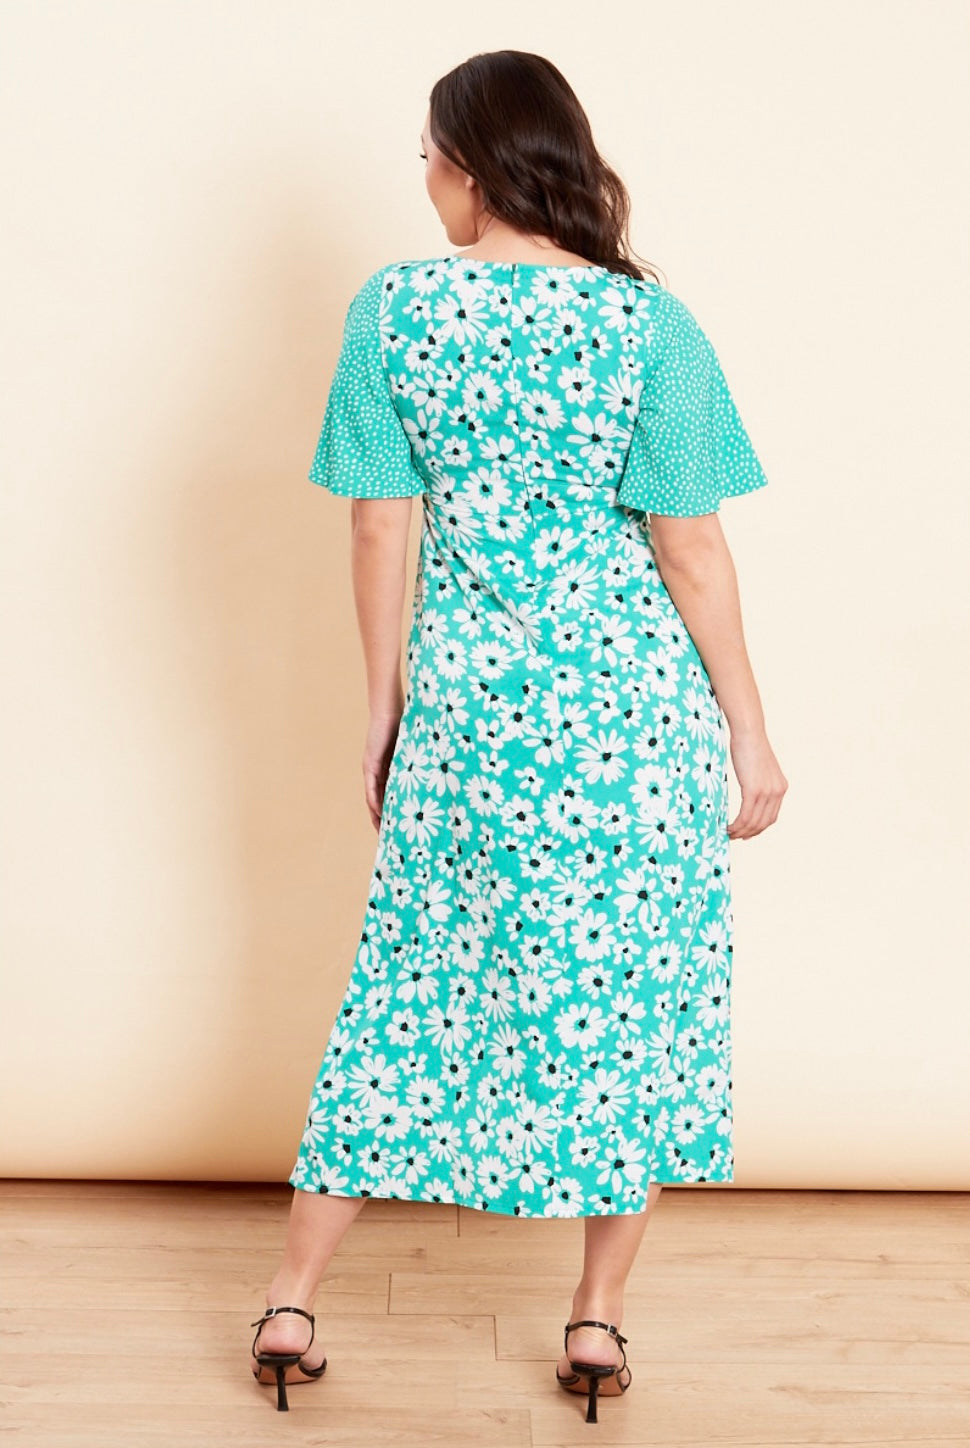 Emerald green floral & spot mixed print flutter sleeve midi dress with empire line & side slit